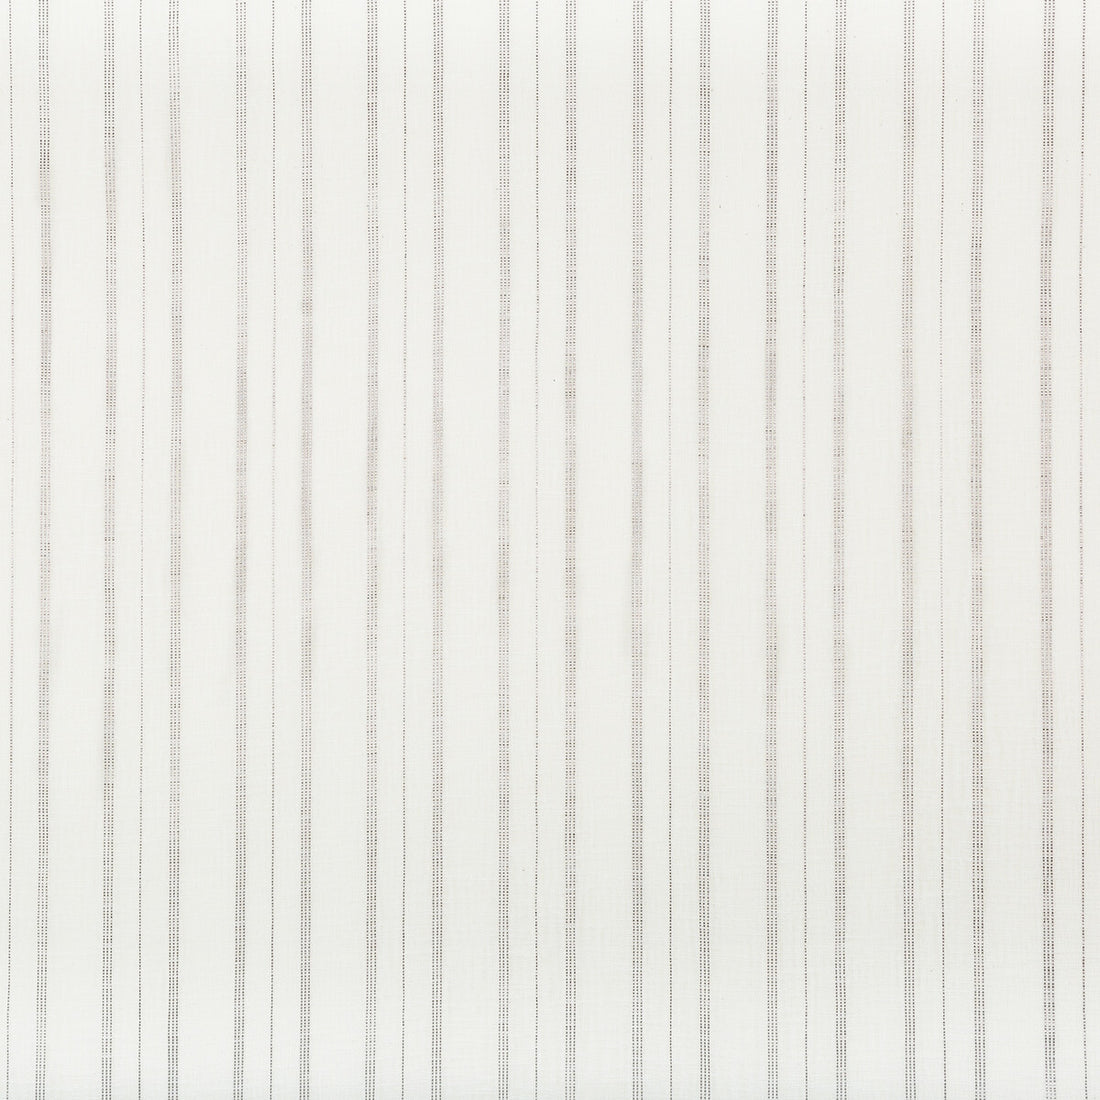 A Fine Line fabric in silver color - pattern 4821.11.0 - by Kravet Contract